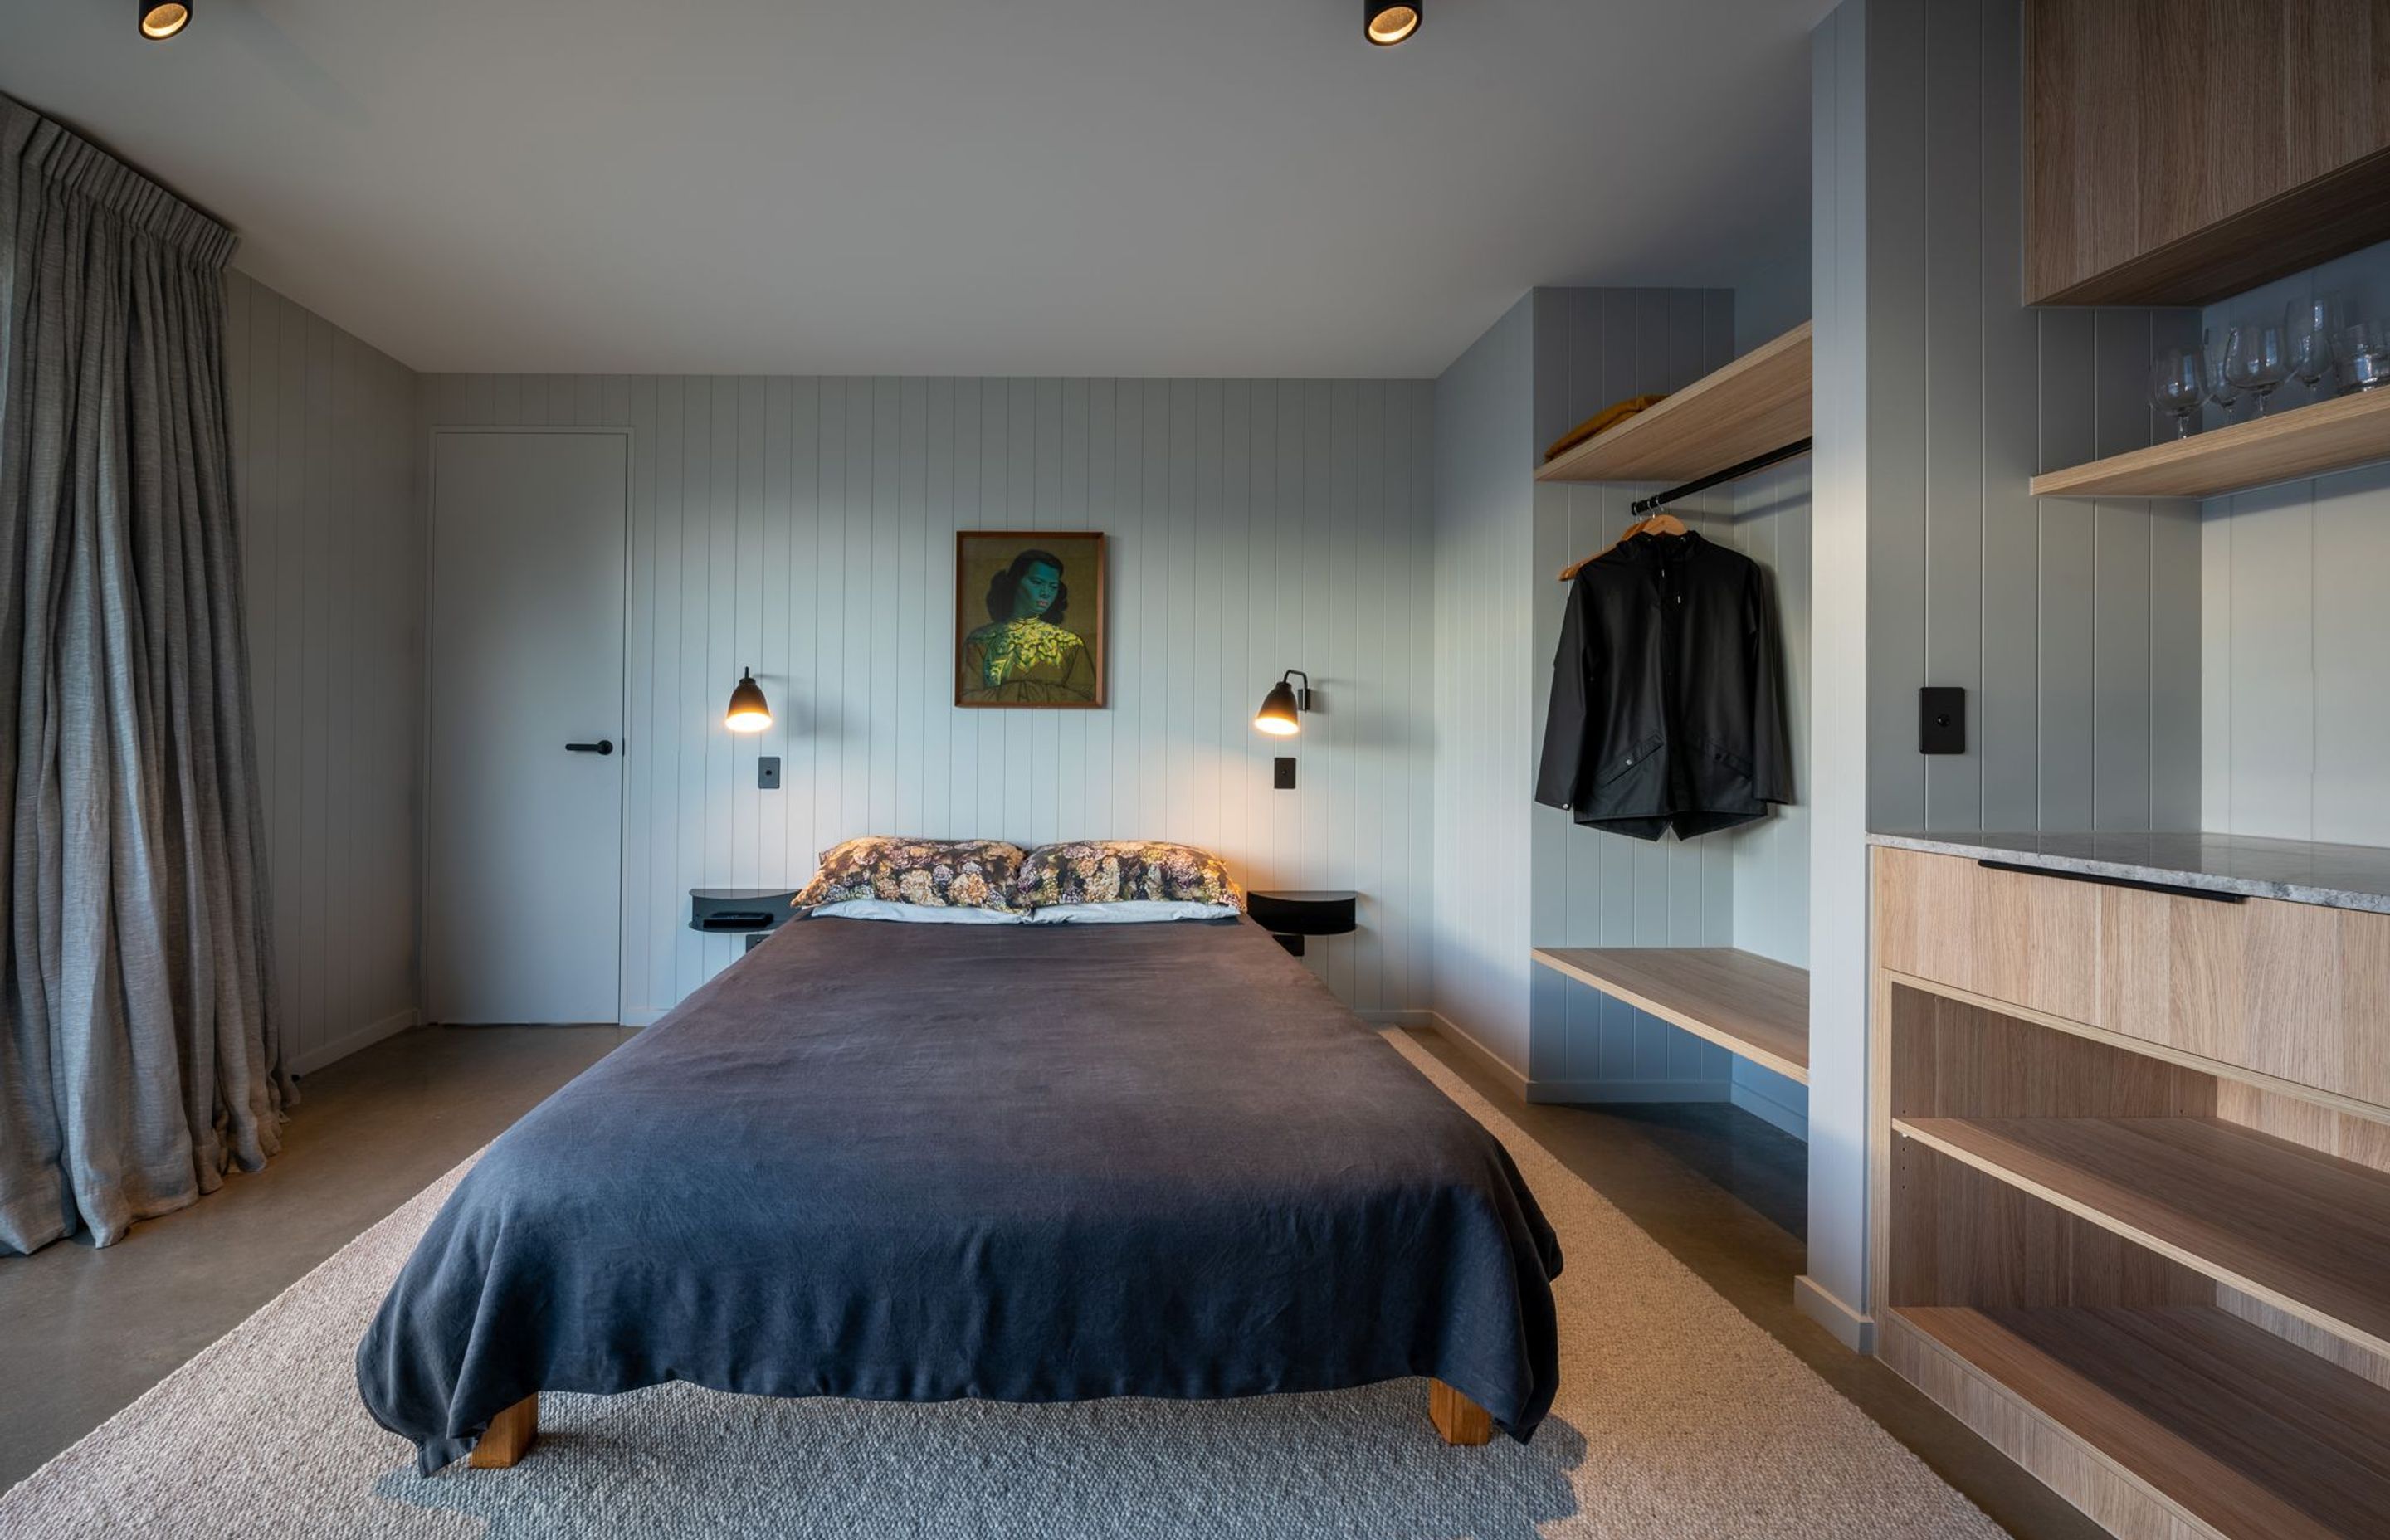 Each bedroom uses a different soft hue on the grooved walls to express the space.